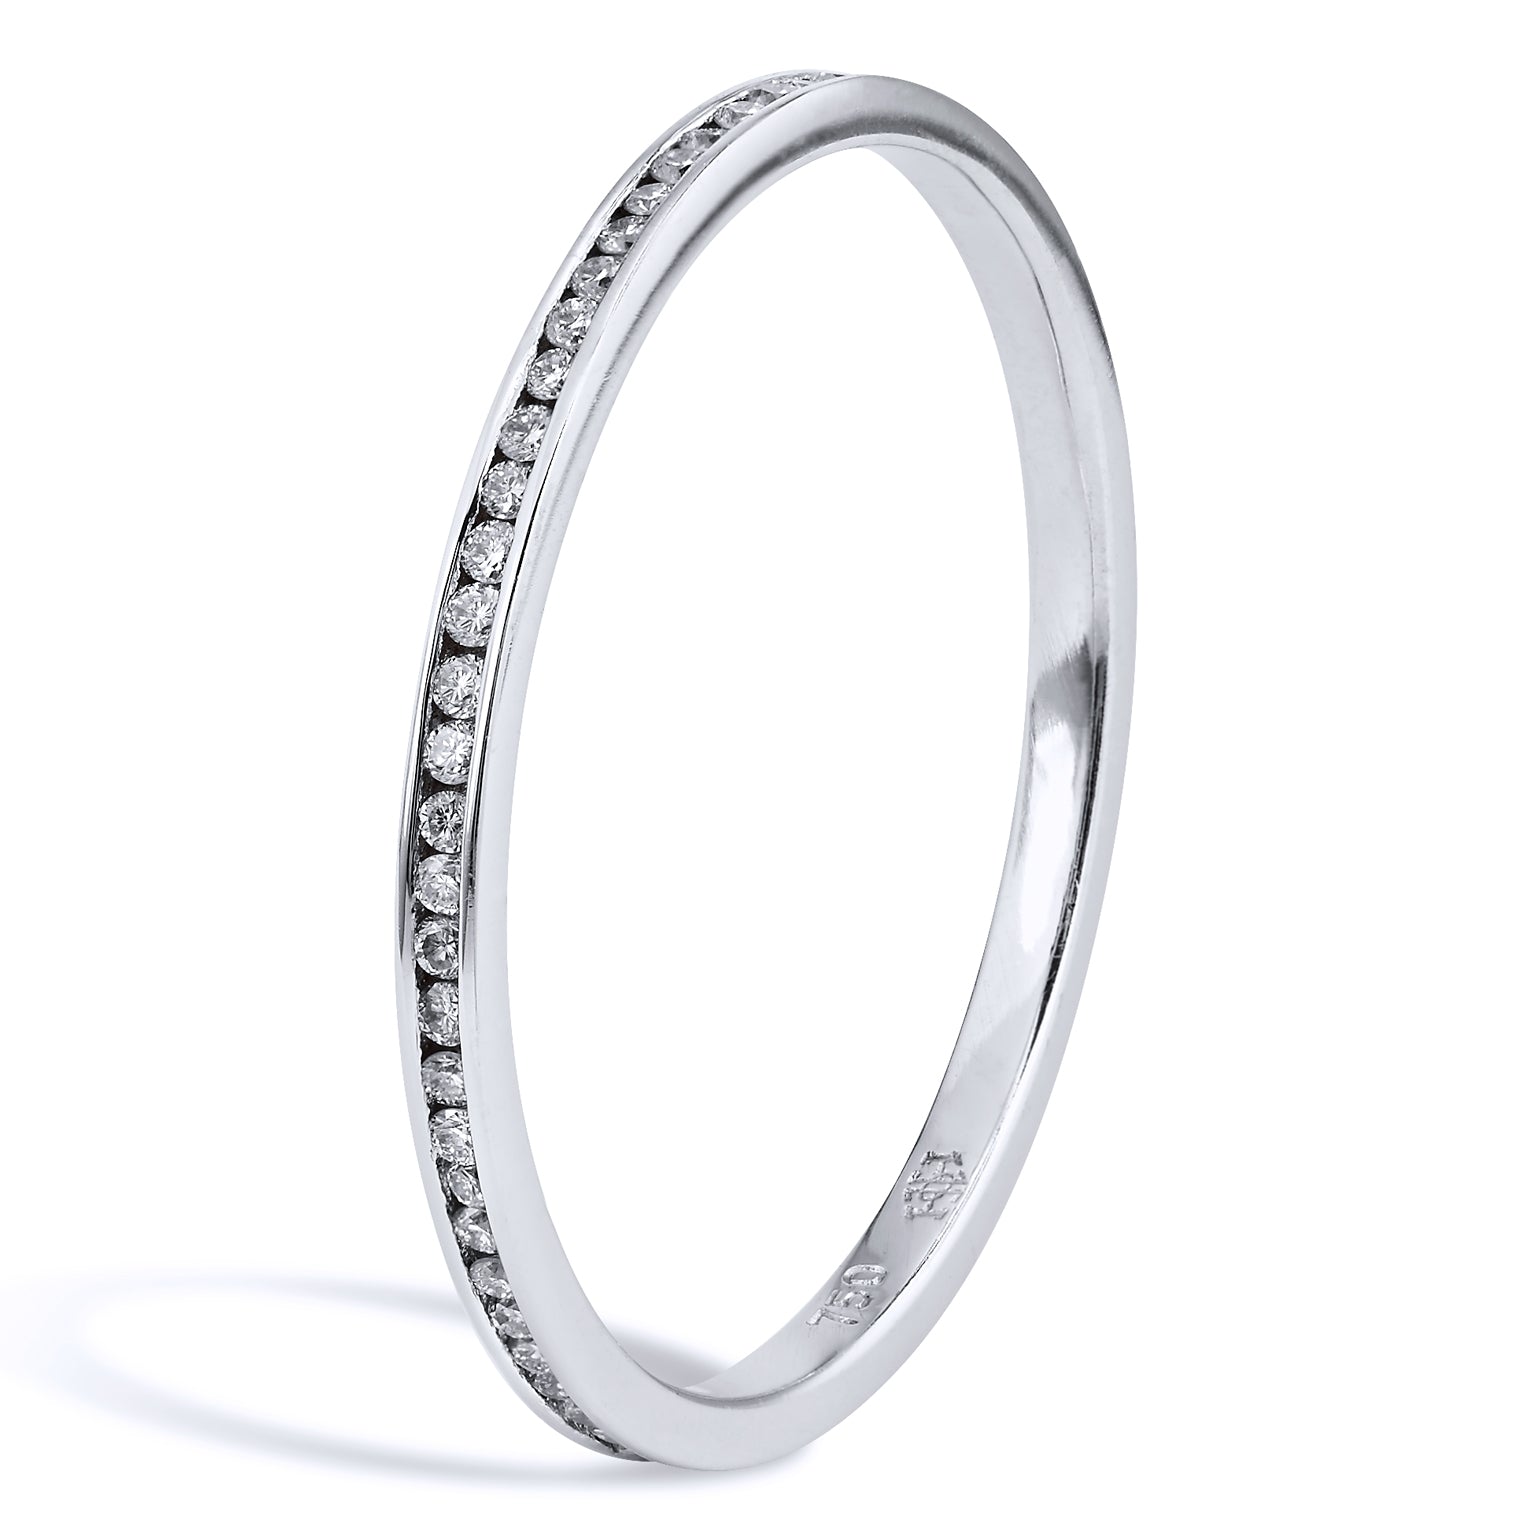 0.20 Carat Diamond Channel Set Band Ring Rings Curated by H